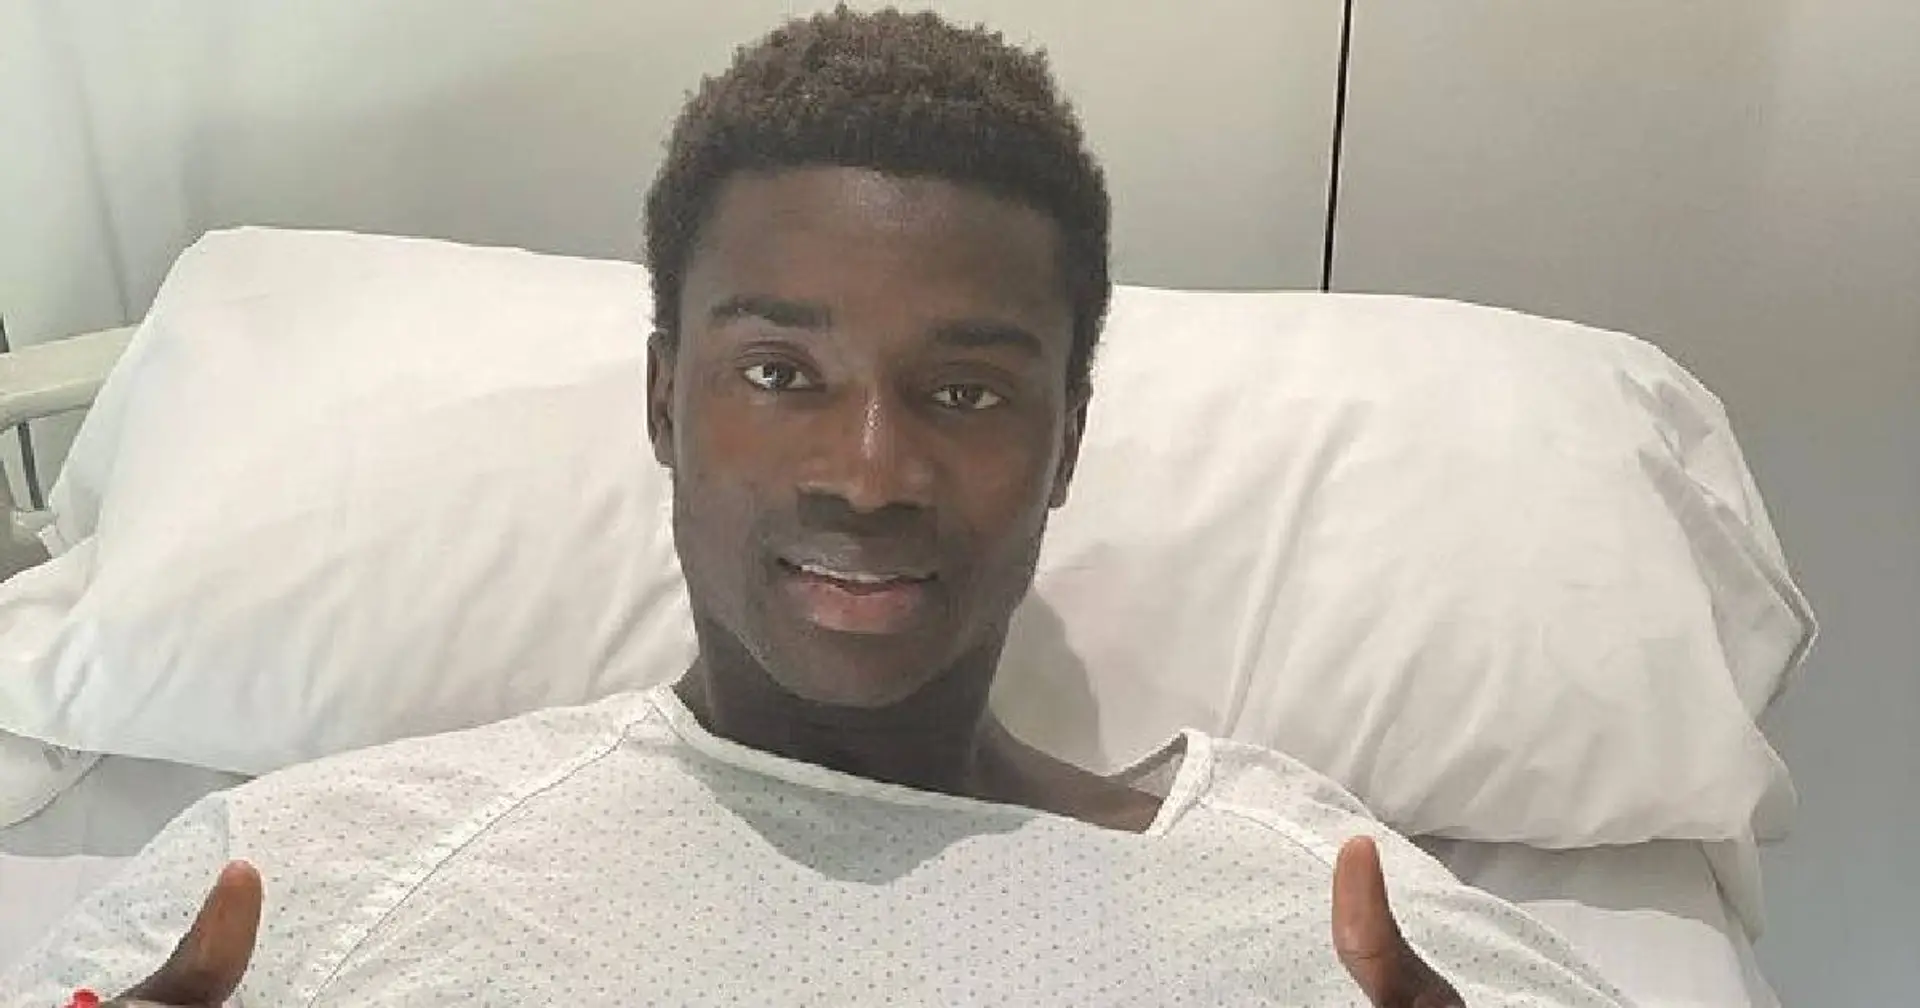 'I will be back stronger than ever before': Moussa Wague posts emotional message after knee surgery